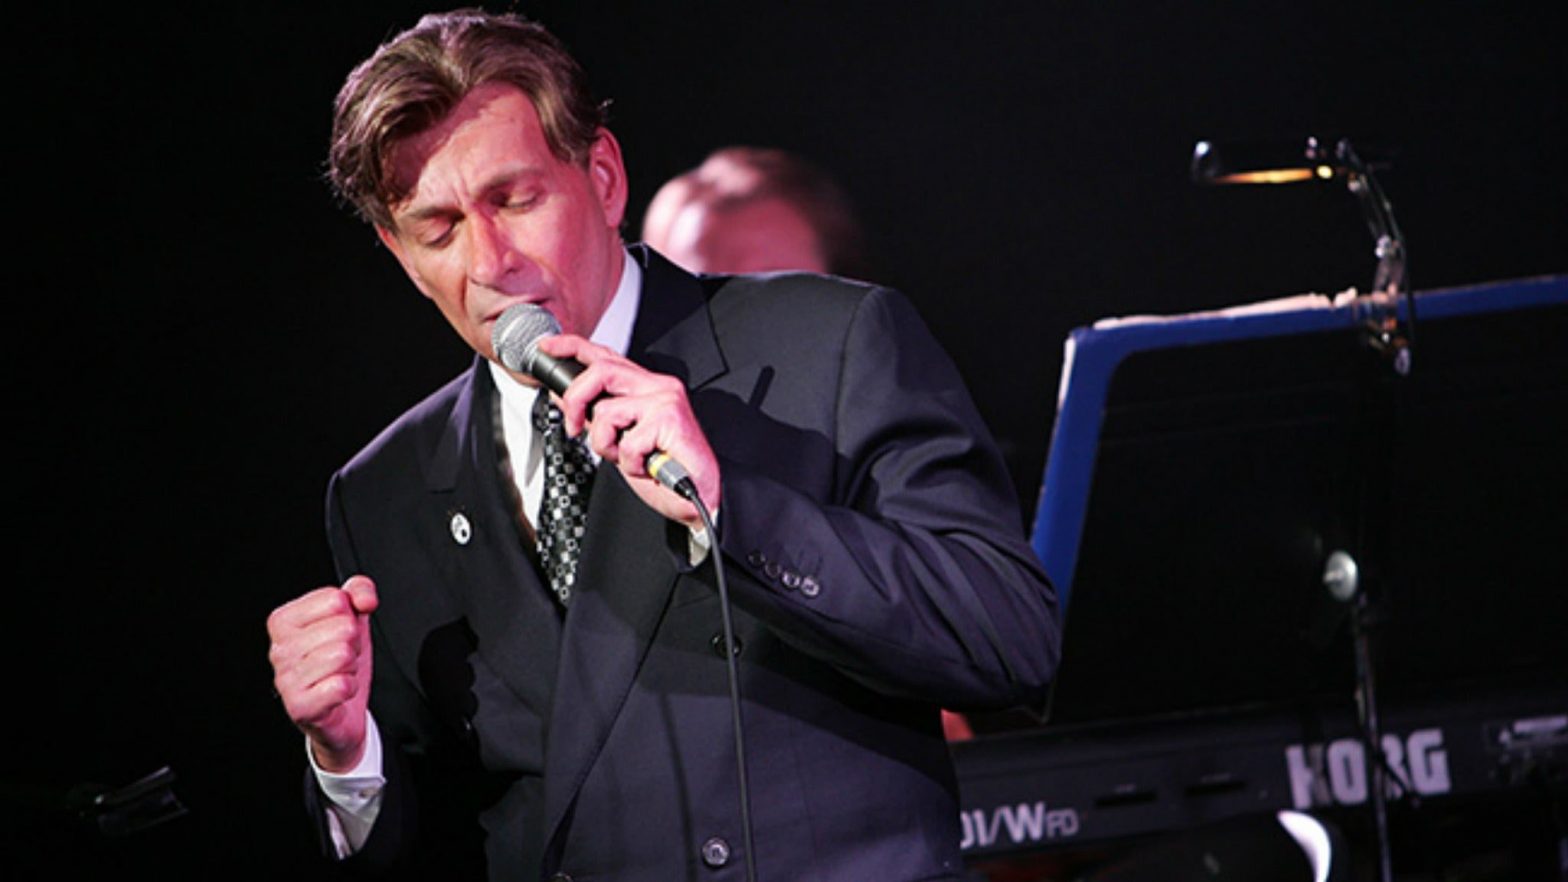 Bobby Caldwell: Wife Mary Caldwell, net worth, age, career, family and more